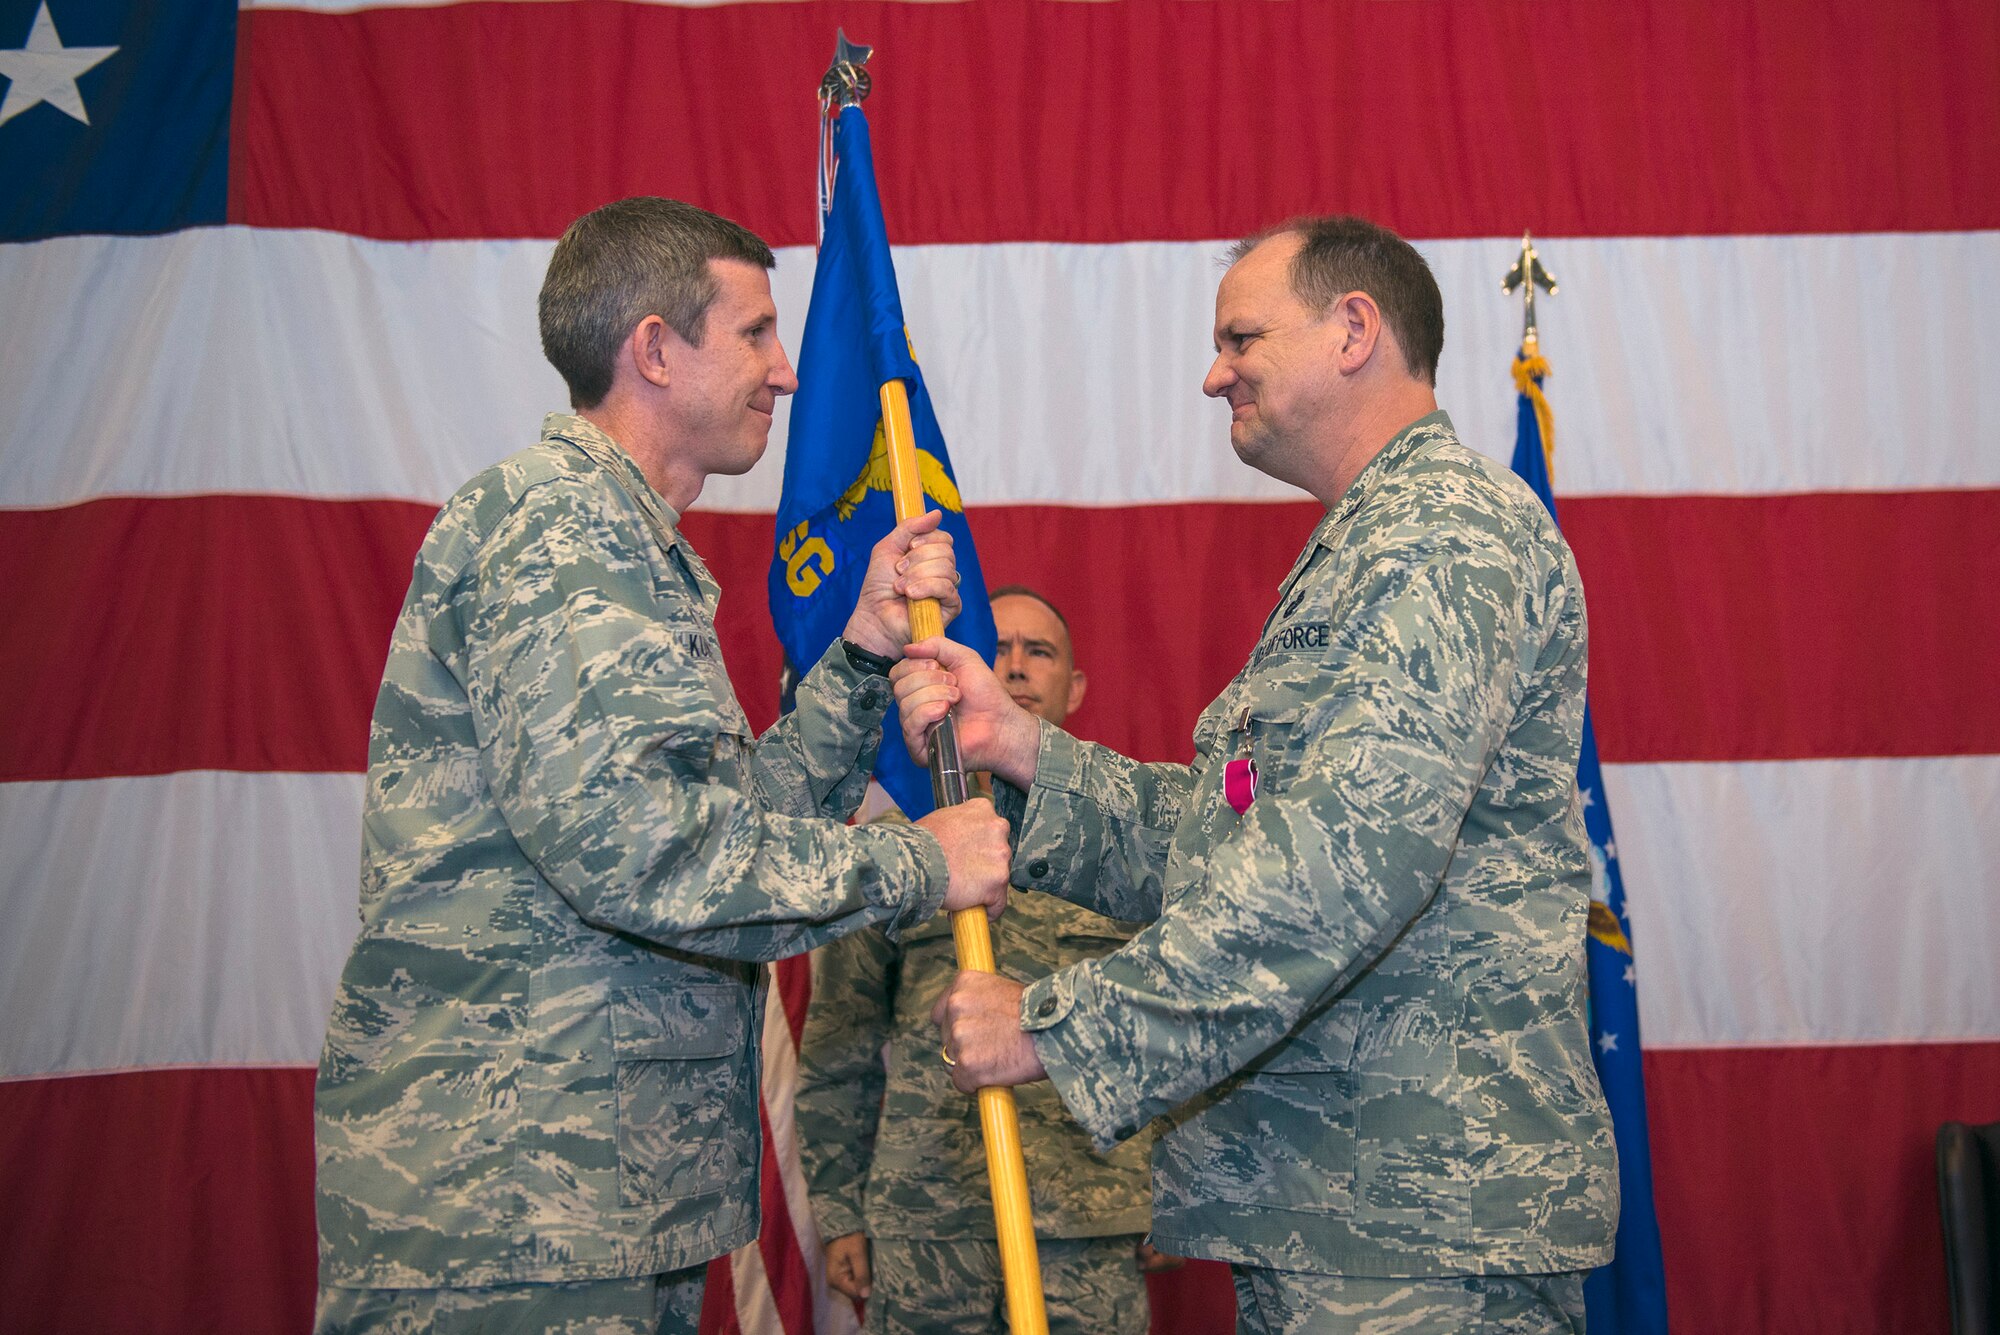 U.S. Air Force Col. Thomas Kunkel, 23d Wing commander, receives the 23d Mission Support Group guidon from Col. Norman Dozier, outgoing 23d MSG commander, during a change of command ceremony, June 21, 2016, at Moody Air Force Base, Ga. Dozier is scheduled to depart to Los Angeles AFB, Calif., to serve as the Space and Missile System Center financial management director.
(U.S. Air Force photo by Airman 1st Class Greg Nash/Released)
